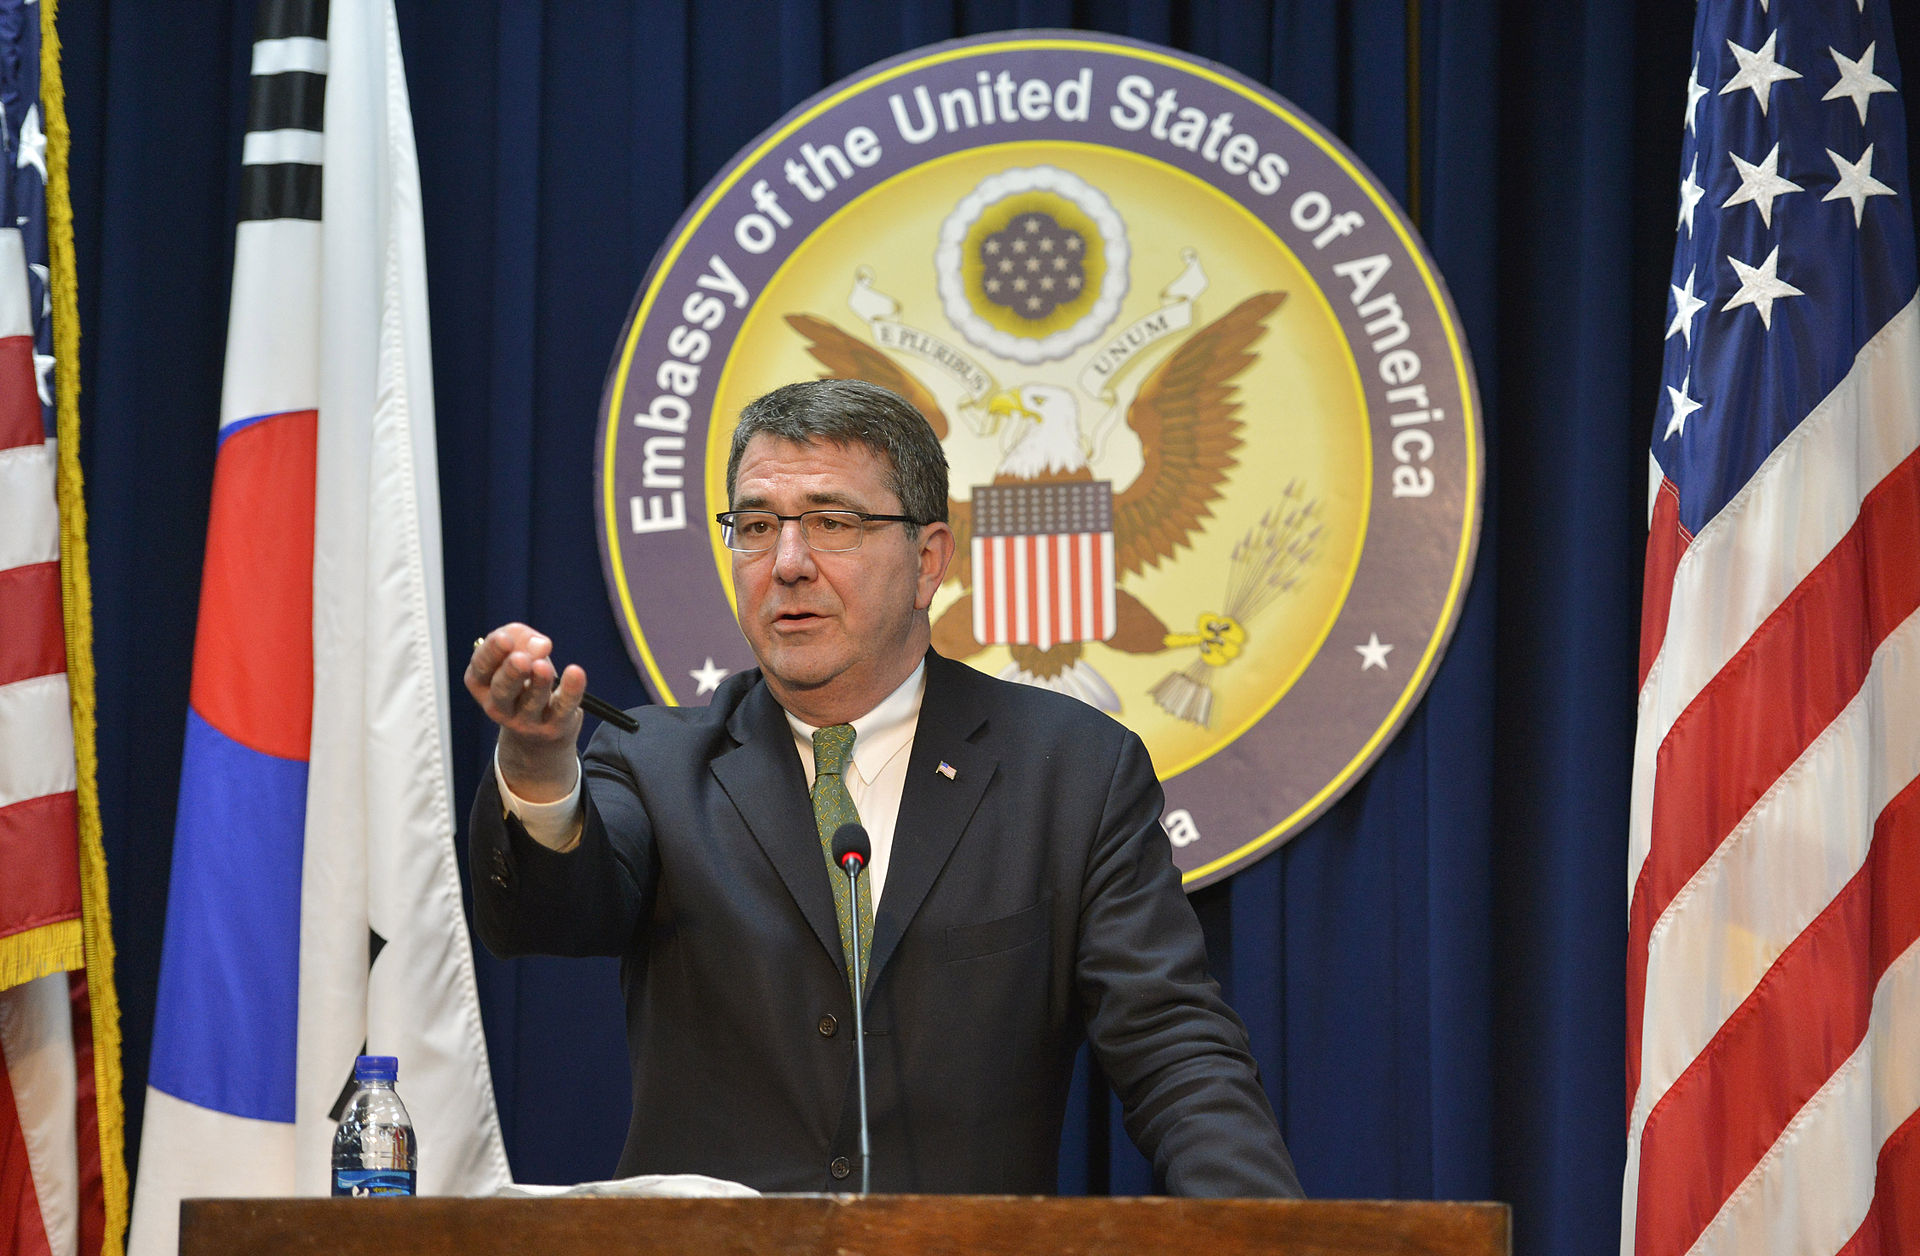 Deputy_Secretary_of_Defense_Ashton_B._Carter_holds_a_press_conference_with_local_media_at_the_U.S._Embassy_in_Seoul,_South_Korea,_on_March_18,_2013_130318-D-NI589-342